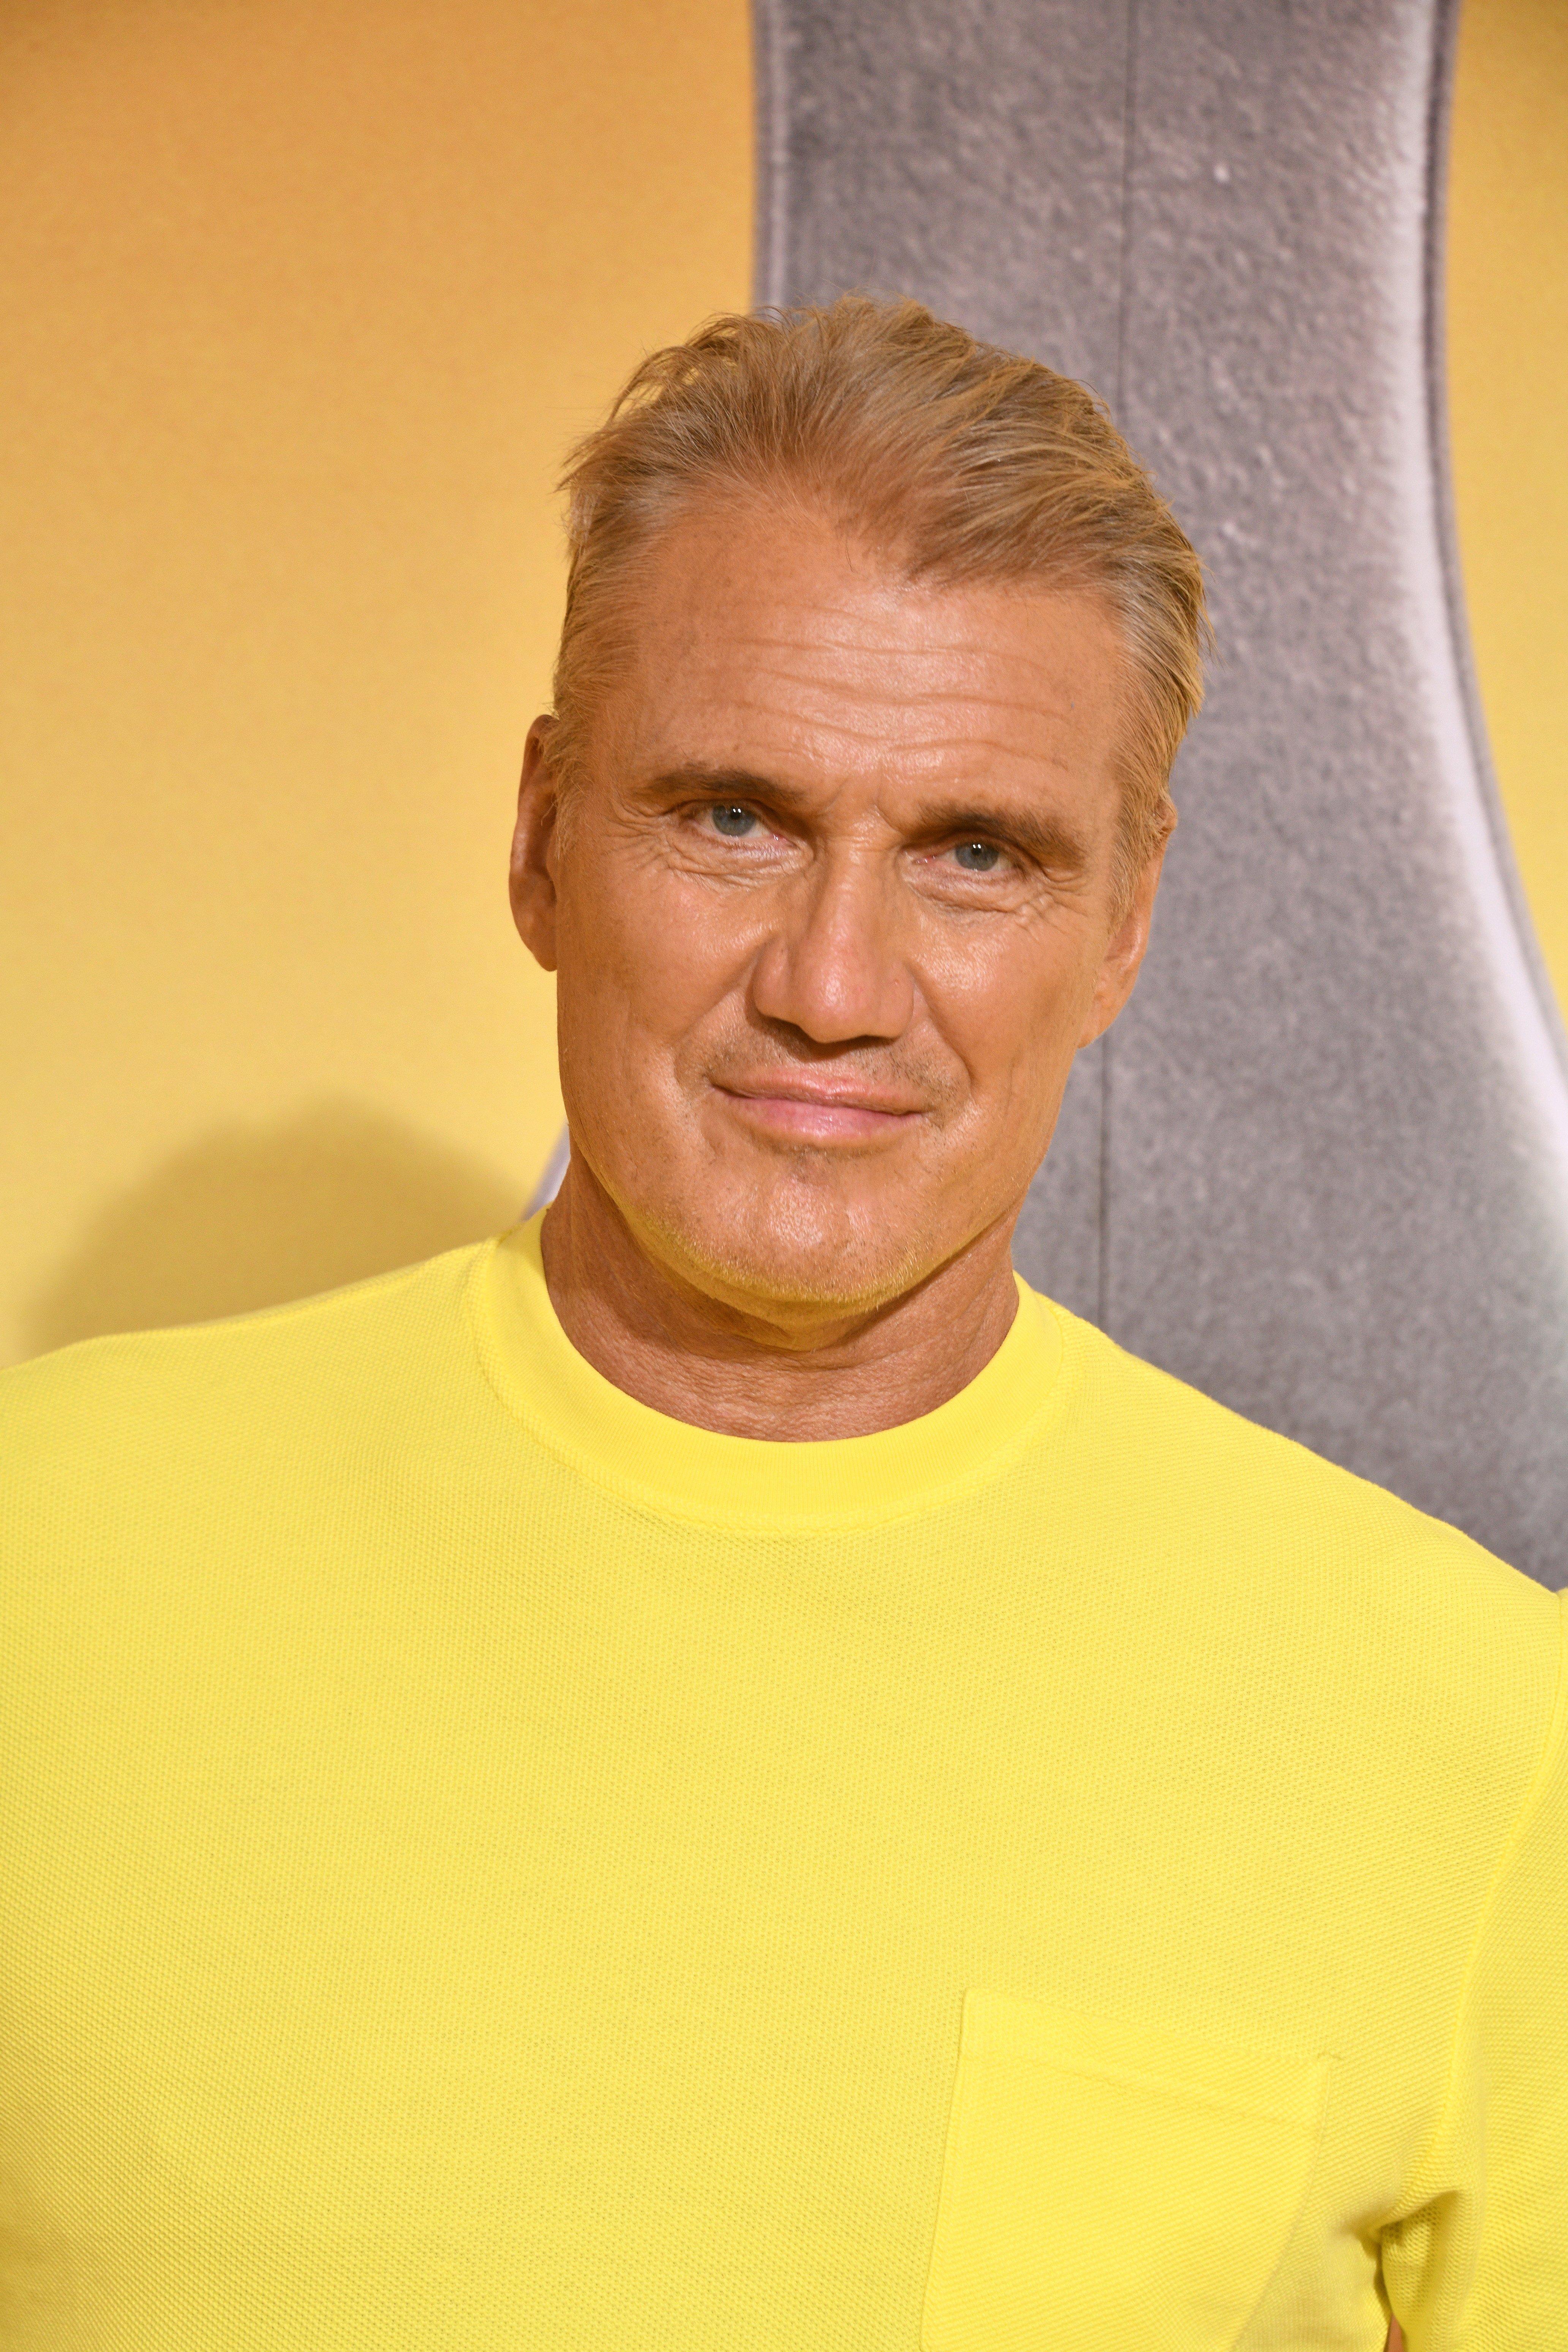  Dolph Lundgren at the Illumination and Universal Pictures' "Minions: The Rise Of Gru" Los Angeles premiere on June 25, 2022 in Hollywood, California | Source: Getty Images